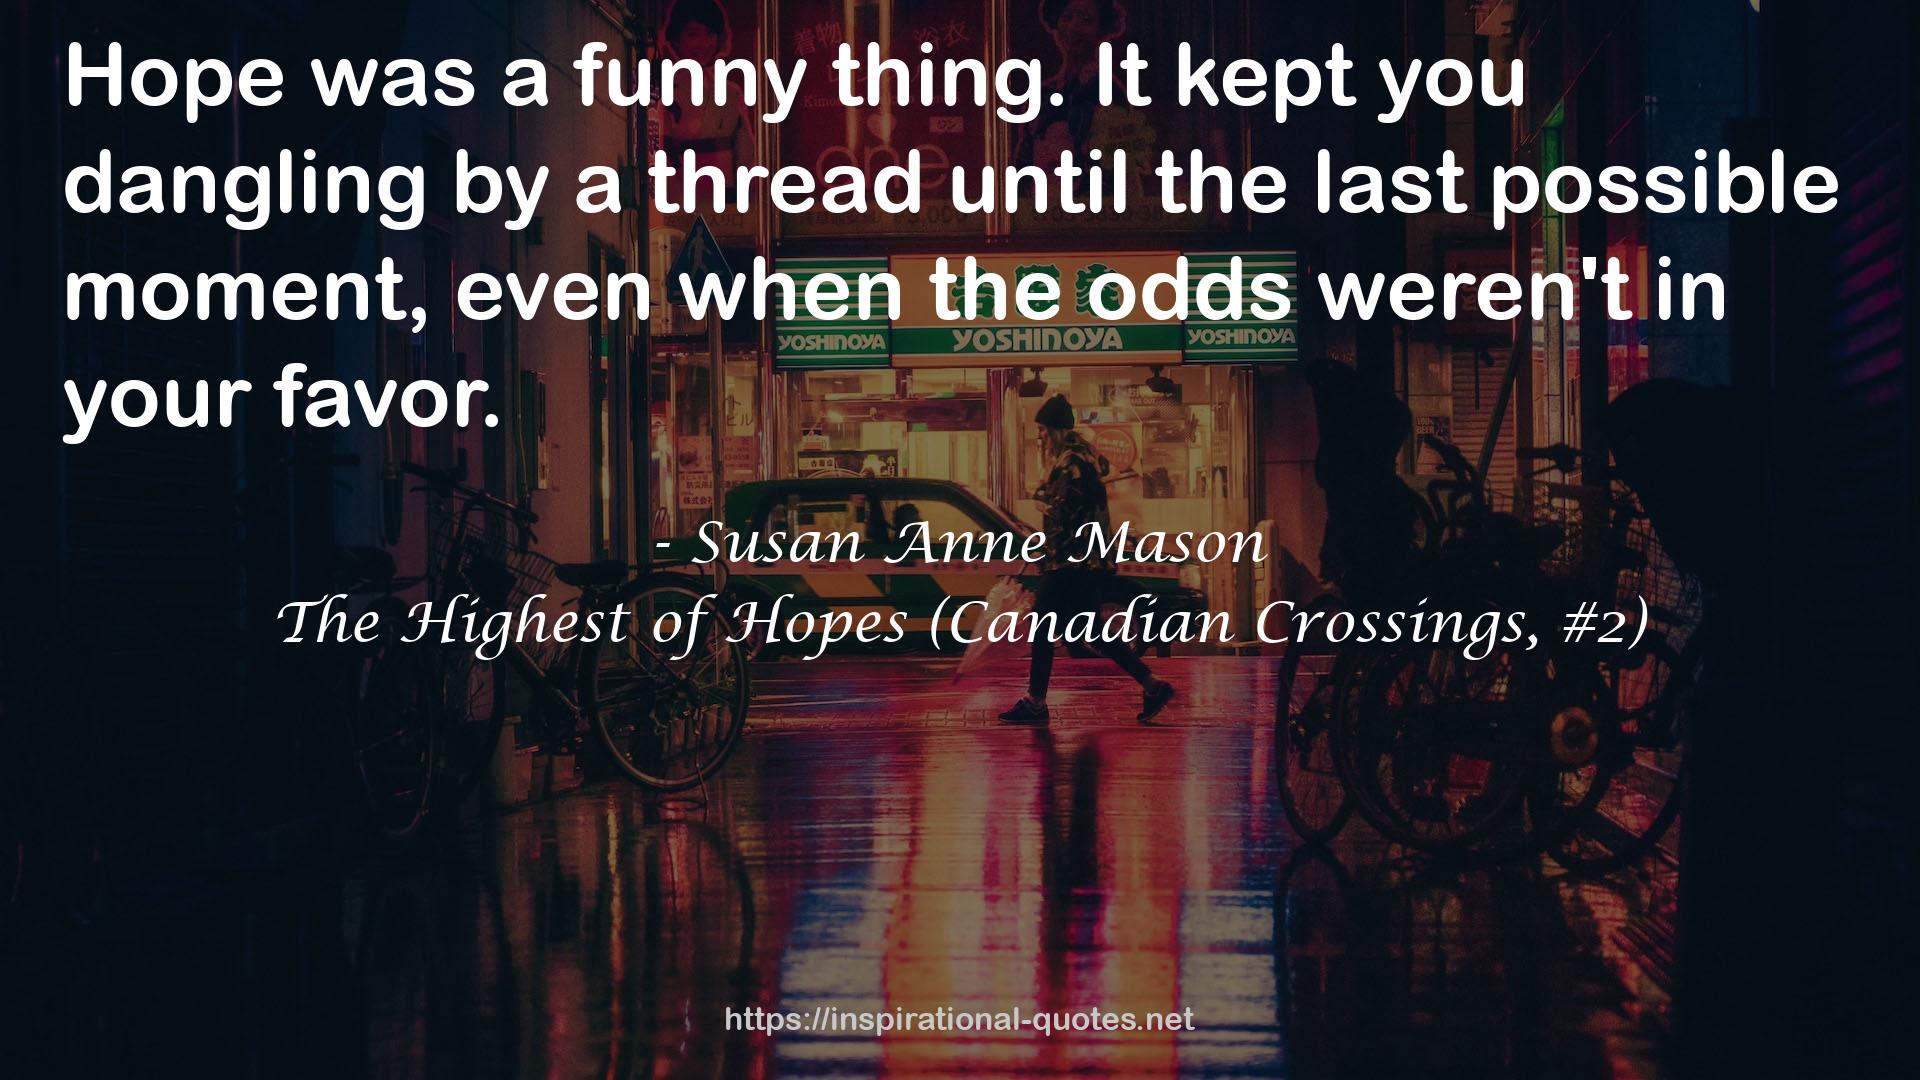 The Highest of Hopes (Canadian Crossings, #2) QUOTES